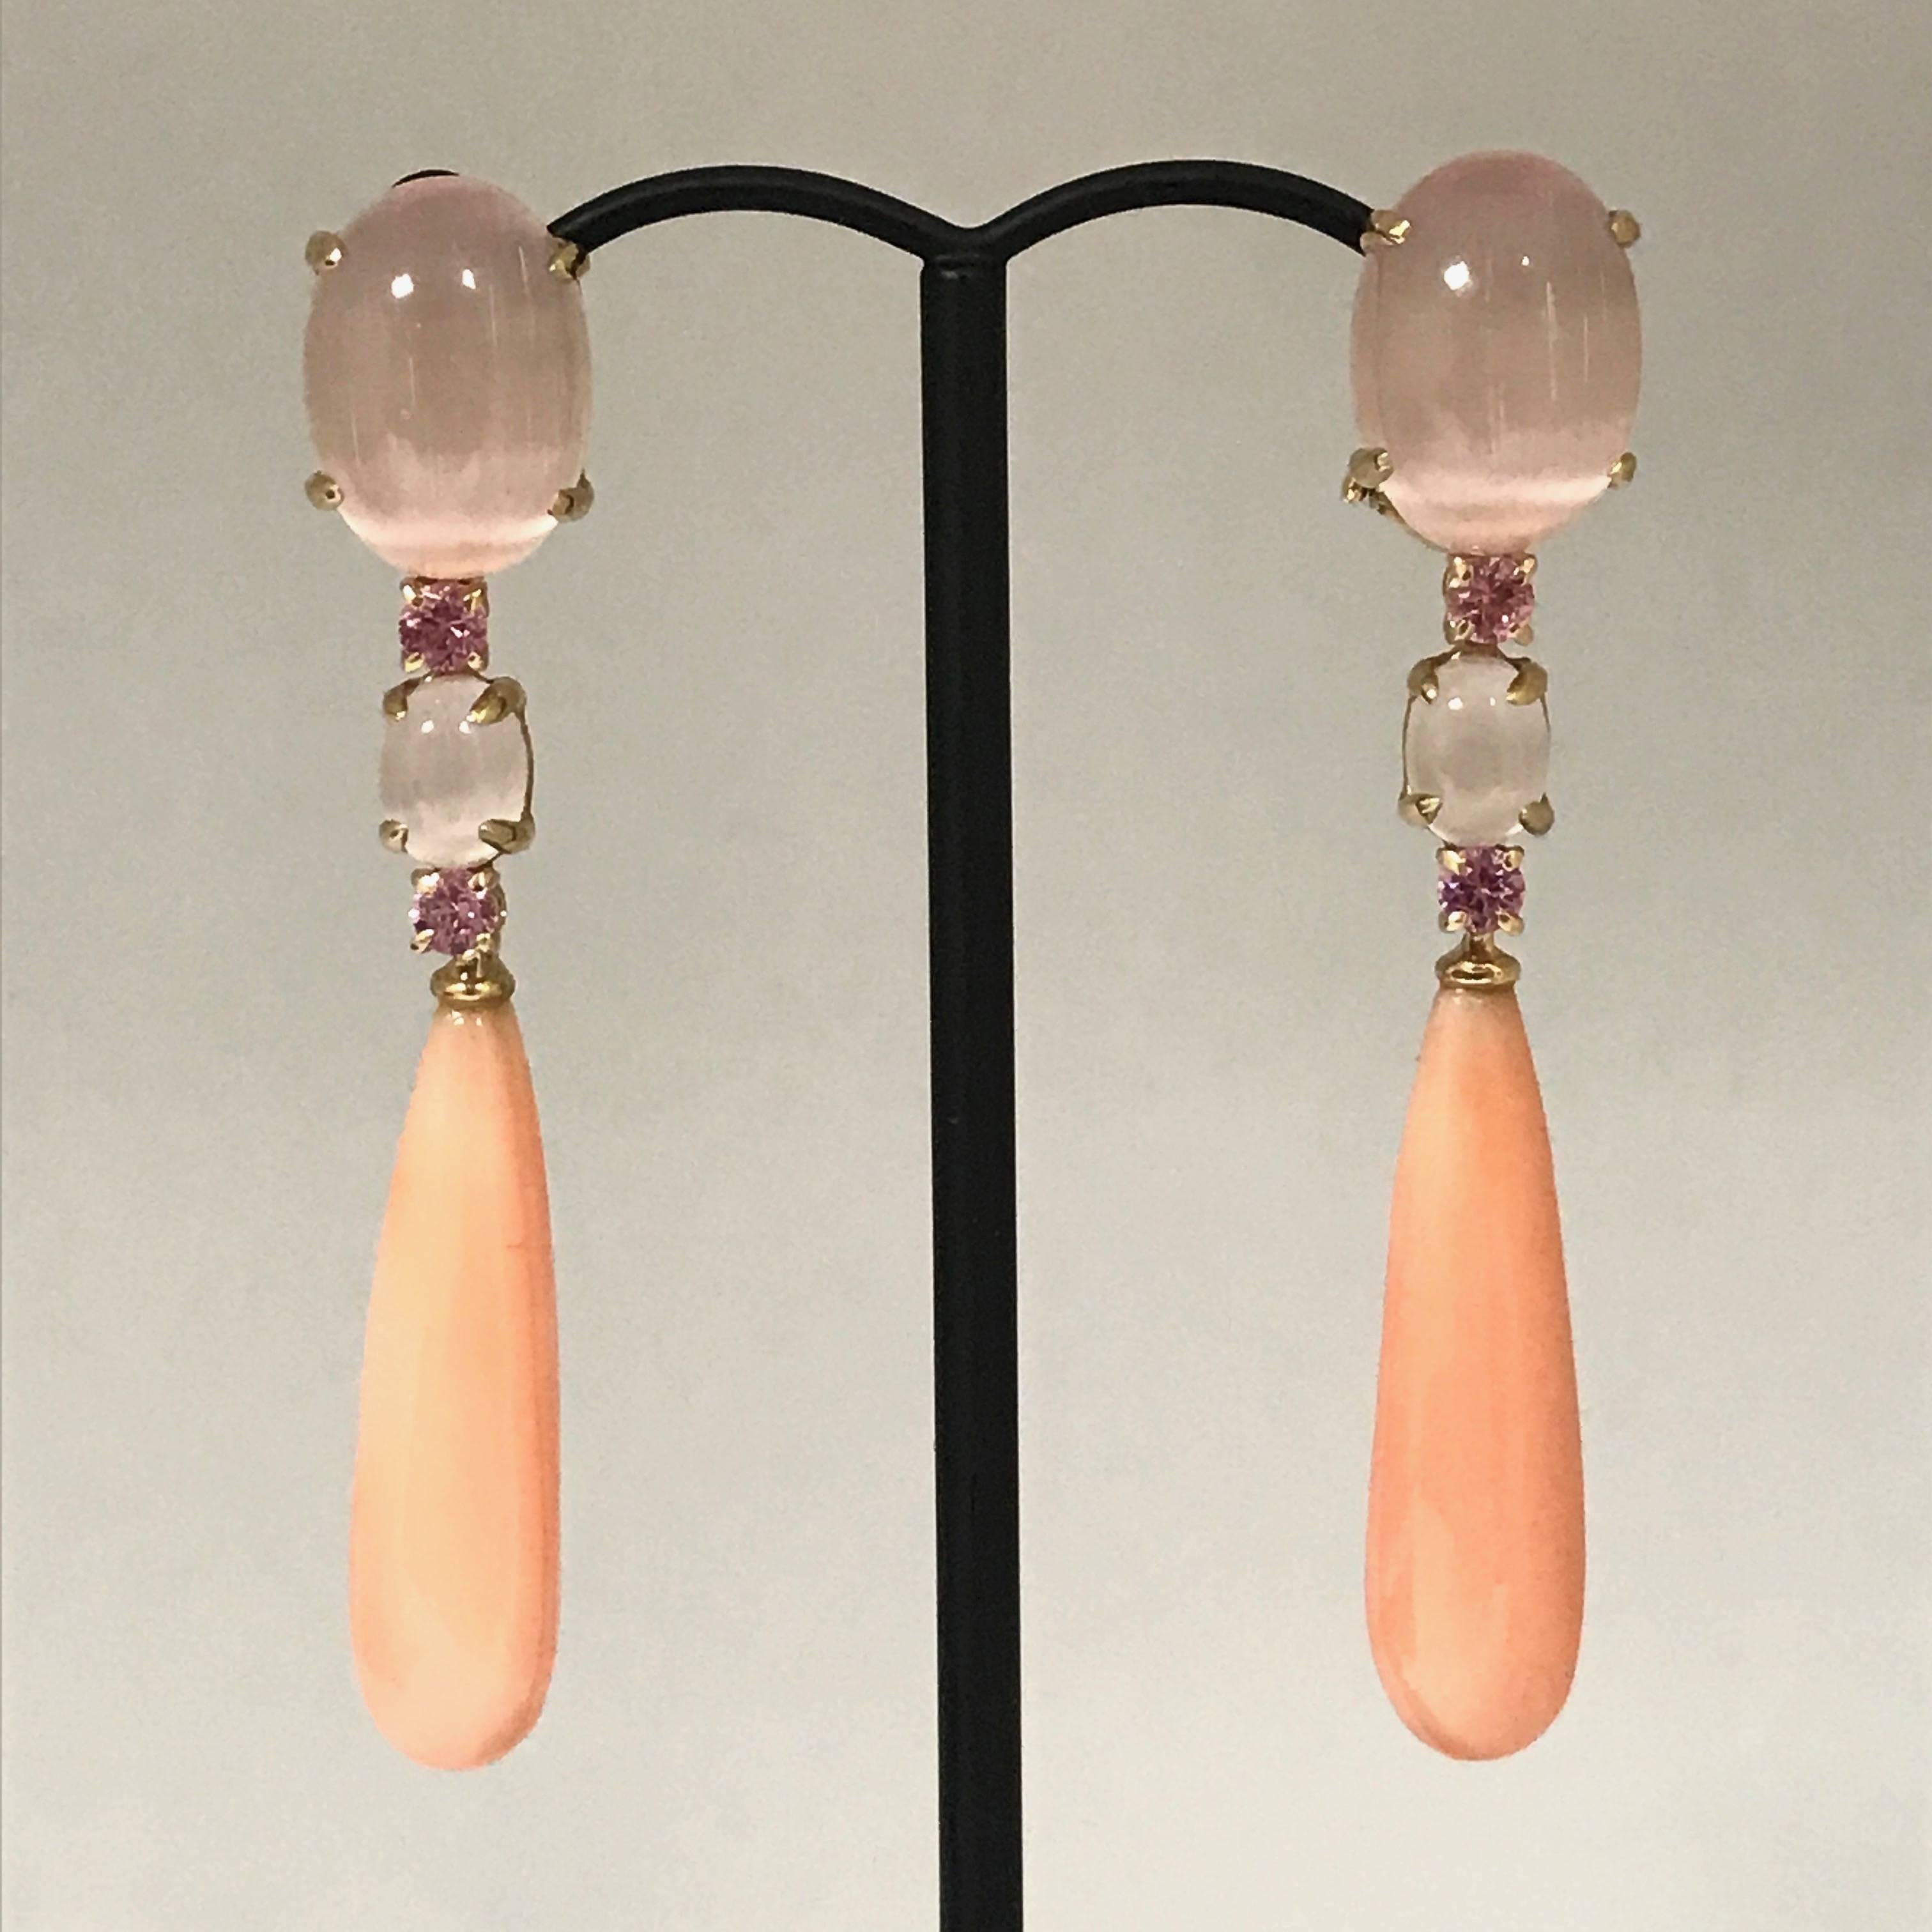 Coral Pink Quartz and Pink Sapphires Yellow Gold Earrings.
Coral
Pink Quartz
Pink Sapphires 0,28 Carat
Yellow Gold 
